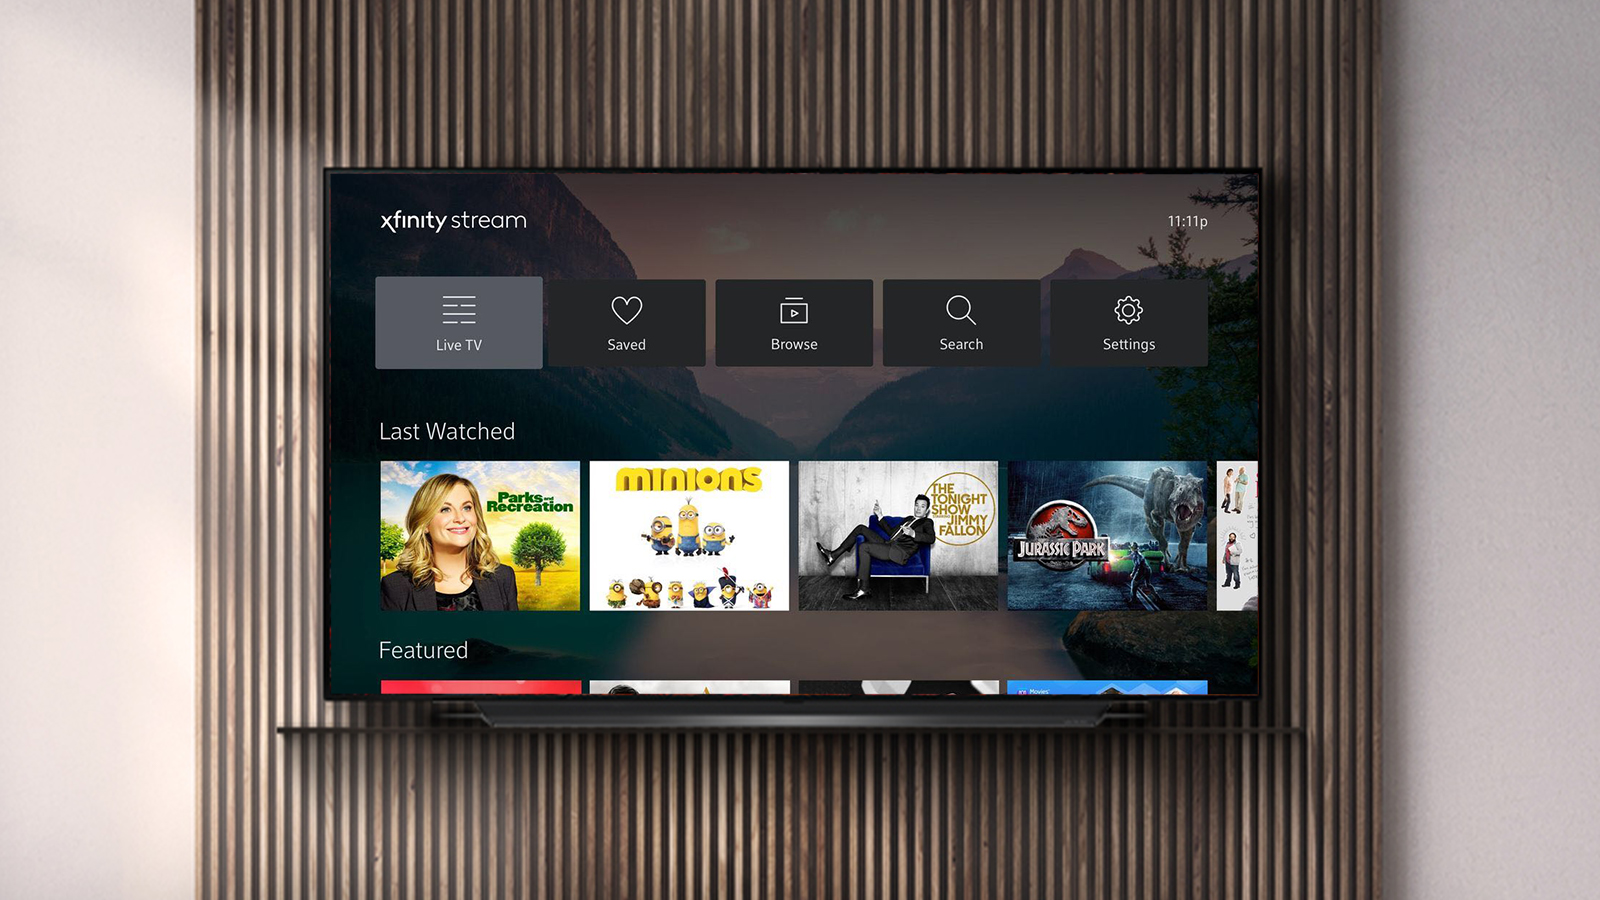 Comcast Xfinity Stream App Now Available for LG Smart TVs Next TV